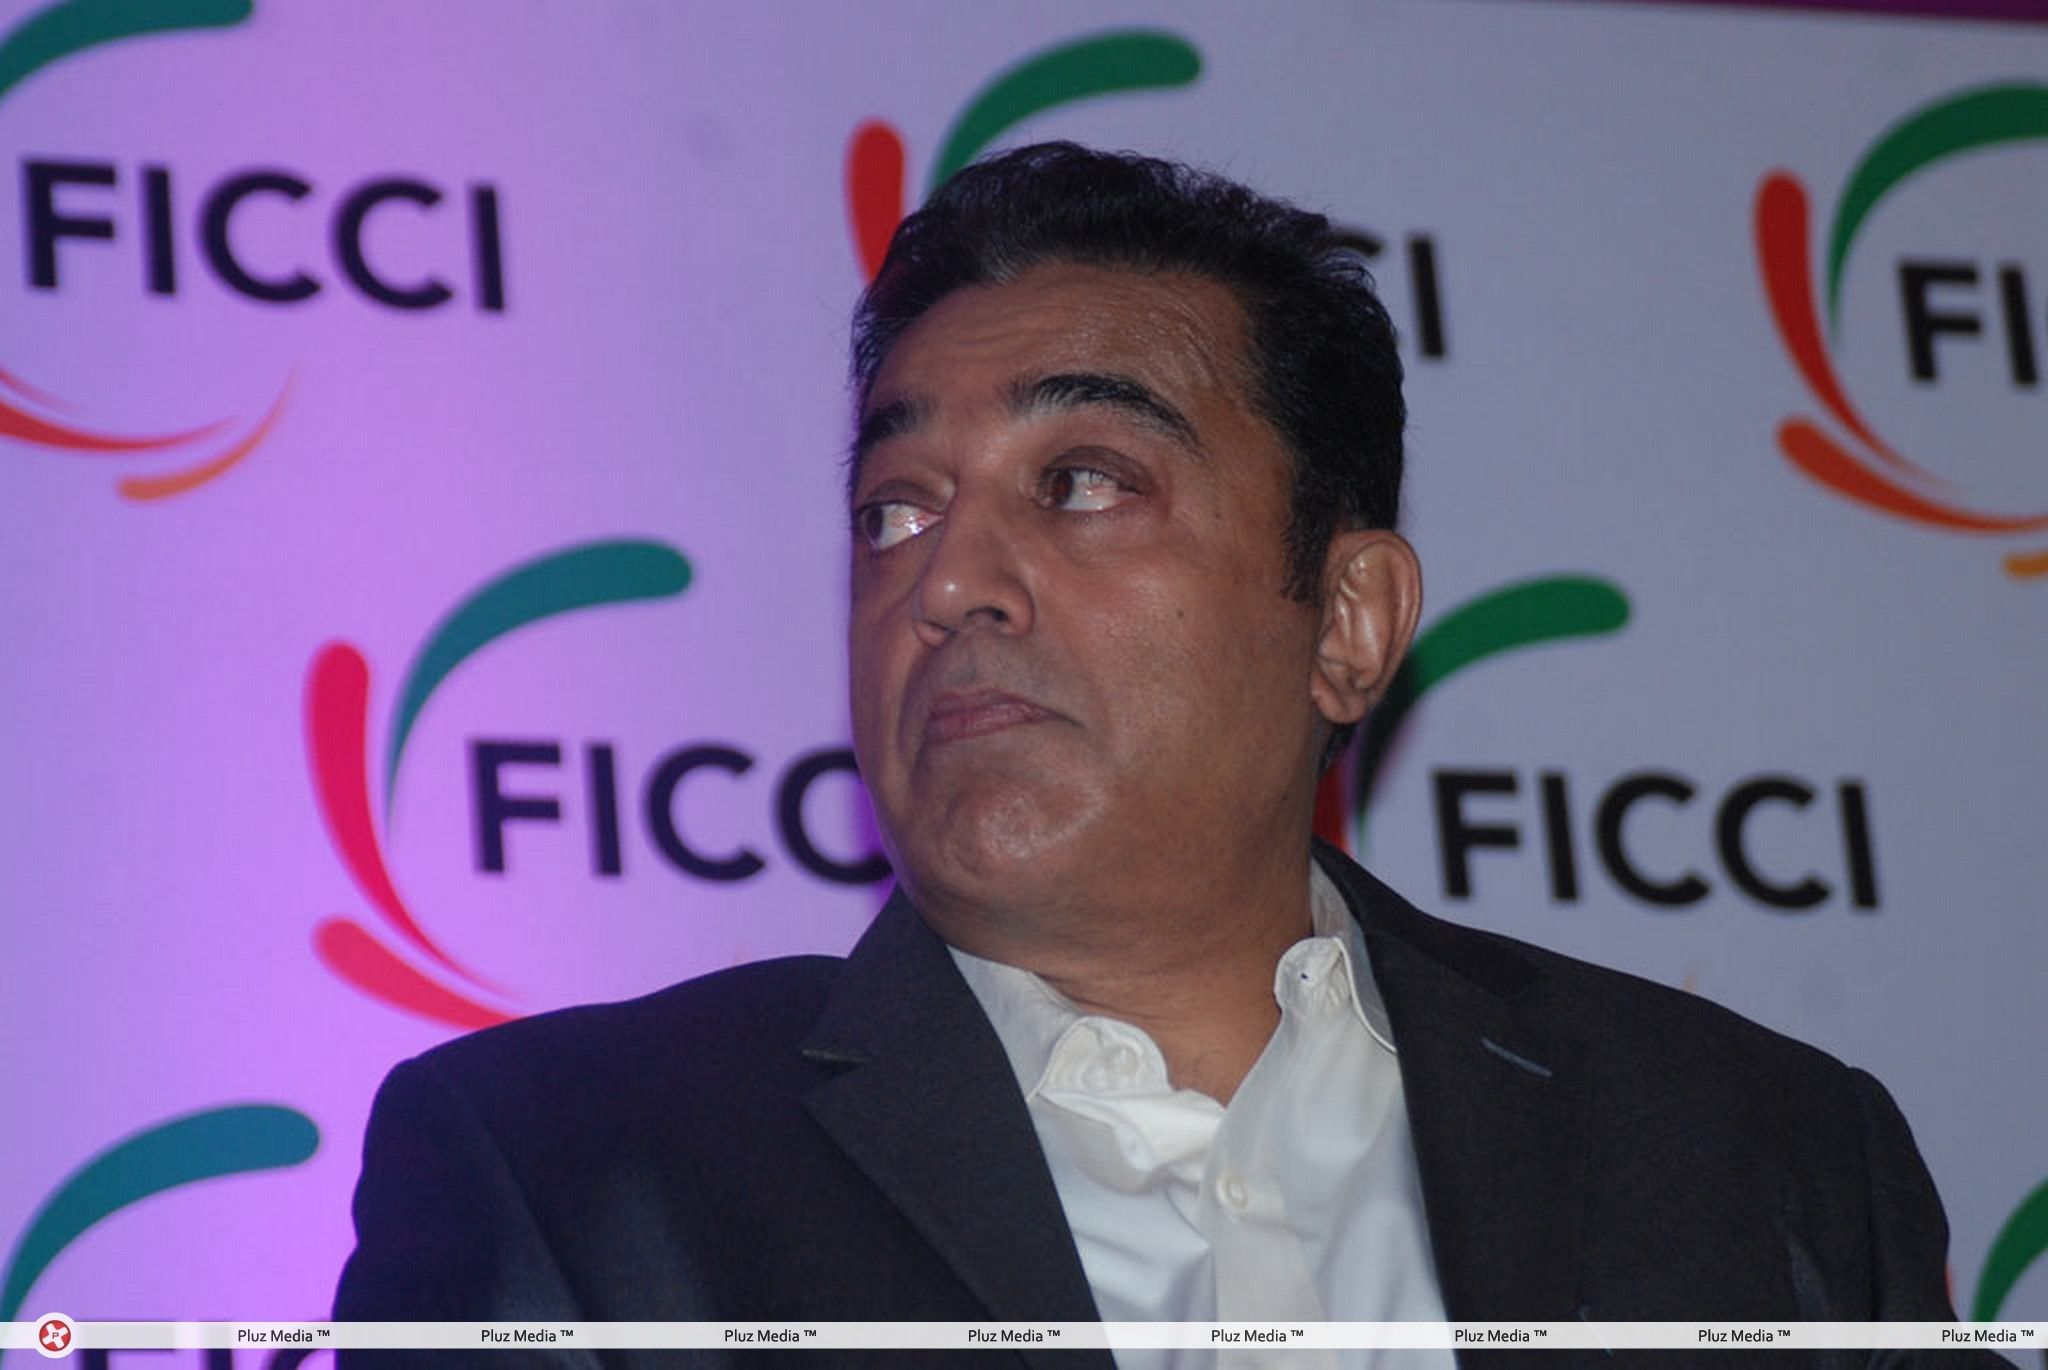 Kamal Haasan - Opening Ceremony of FICCI Stills | Picture 298607